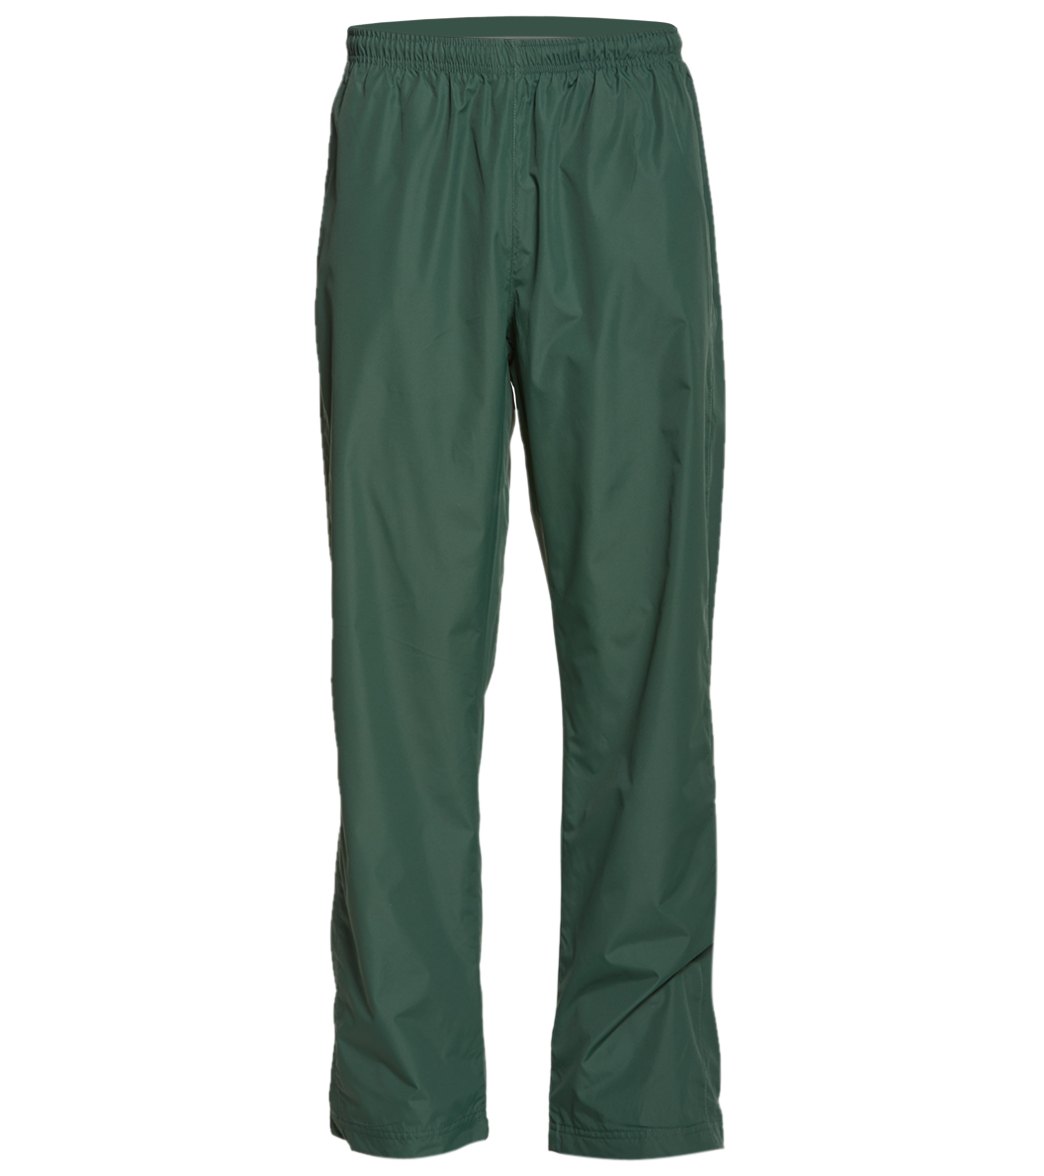 Women's Warm Up Pants - Forest Green Large Polyester - Swimoutlet.com